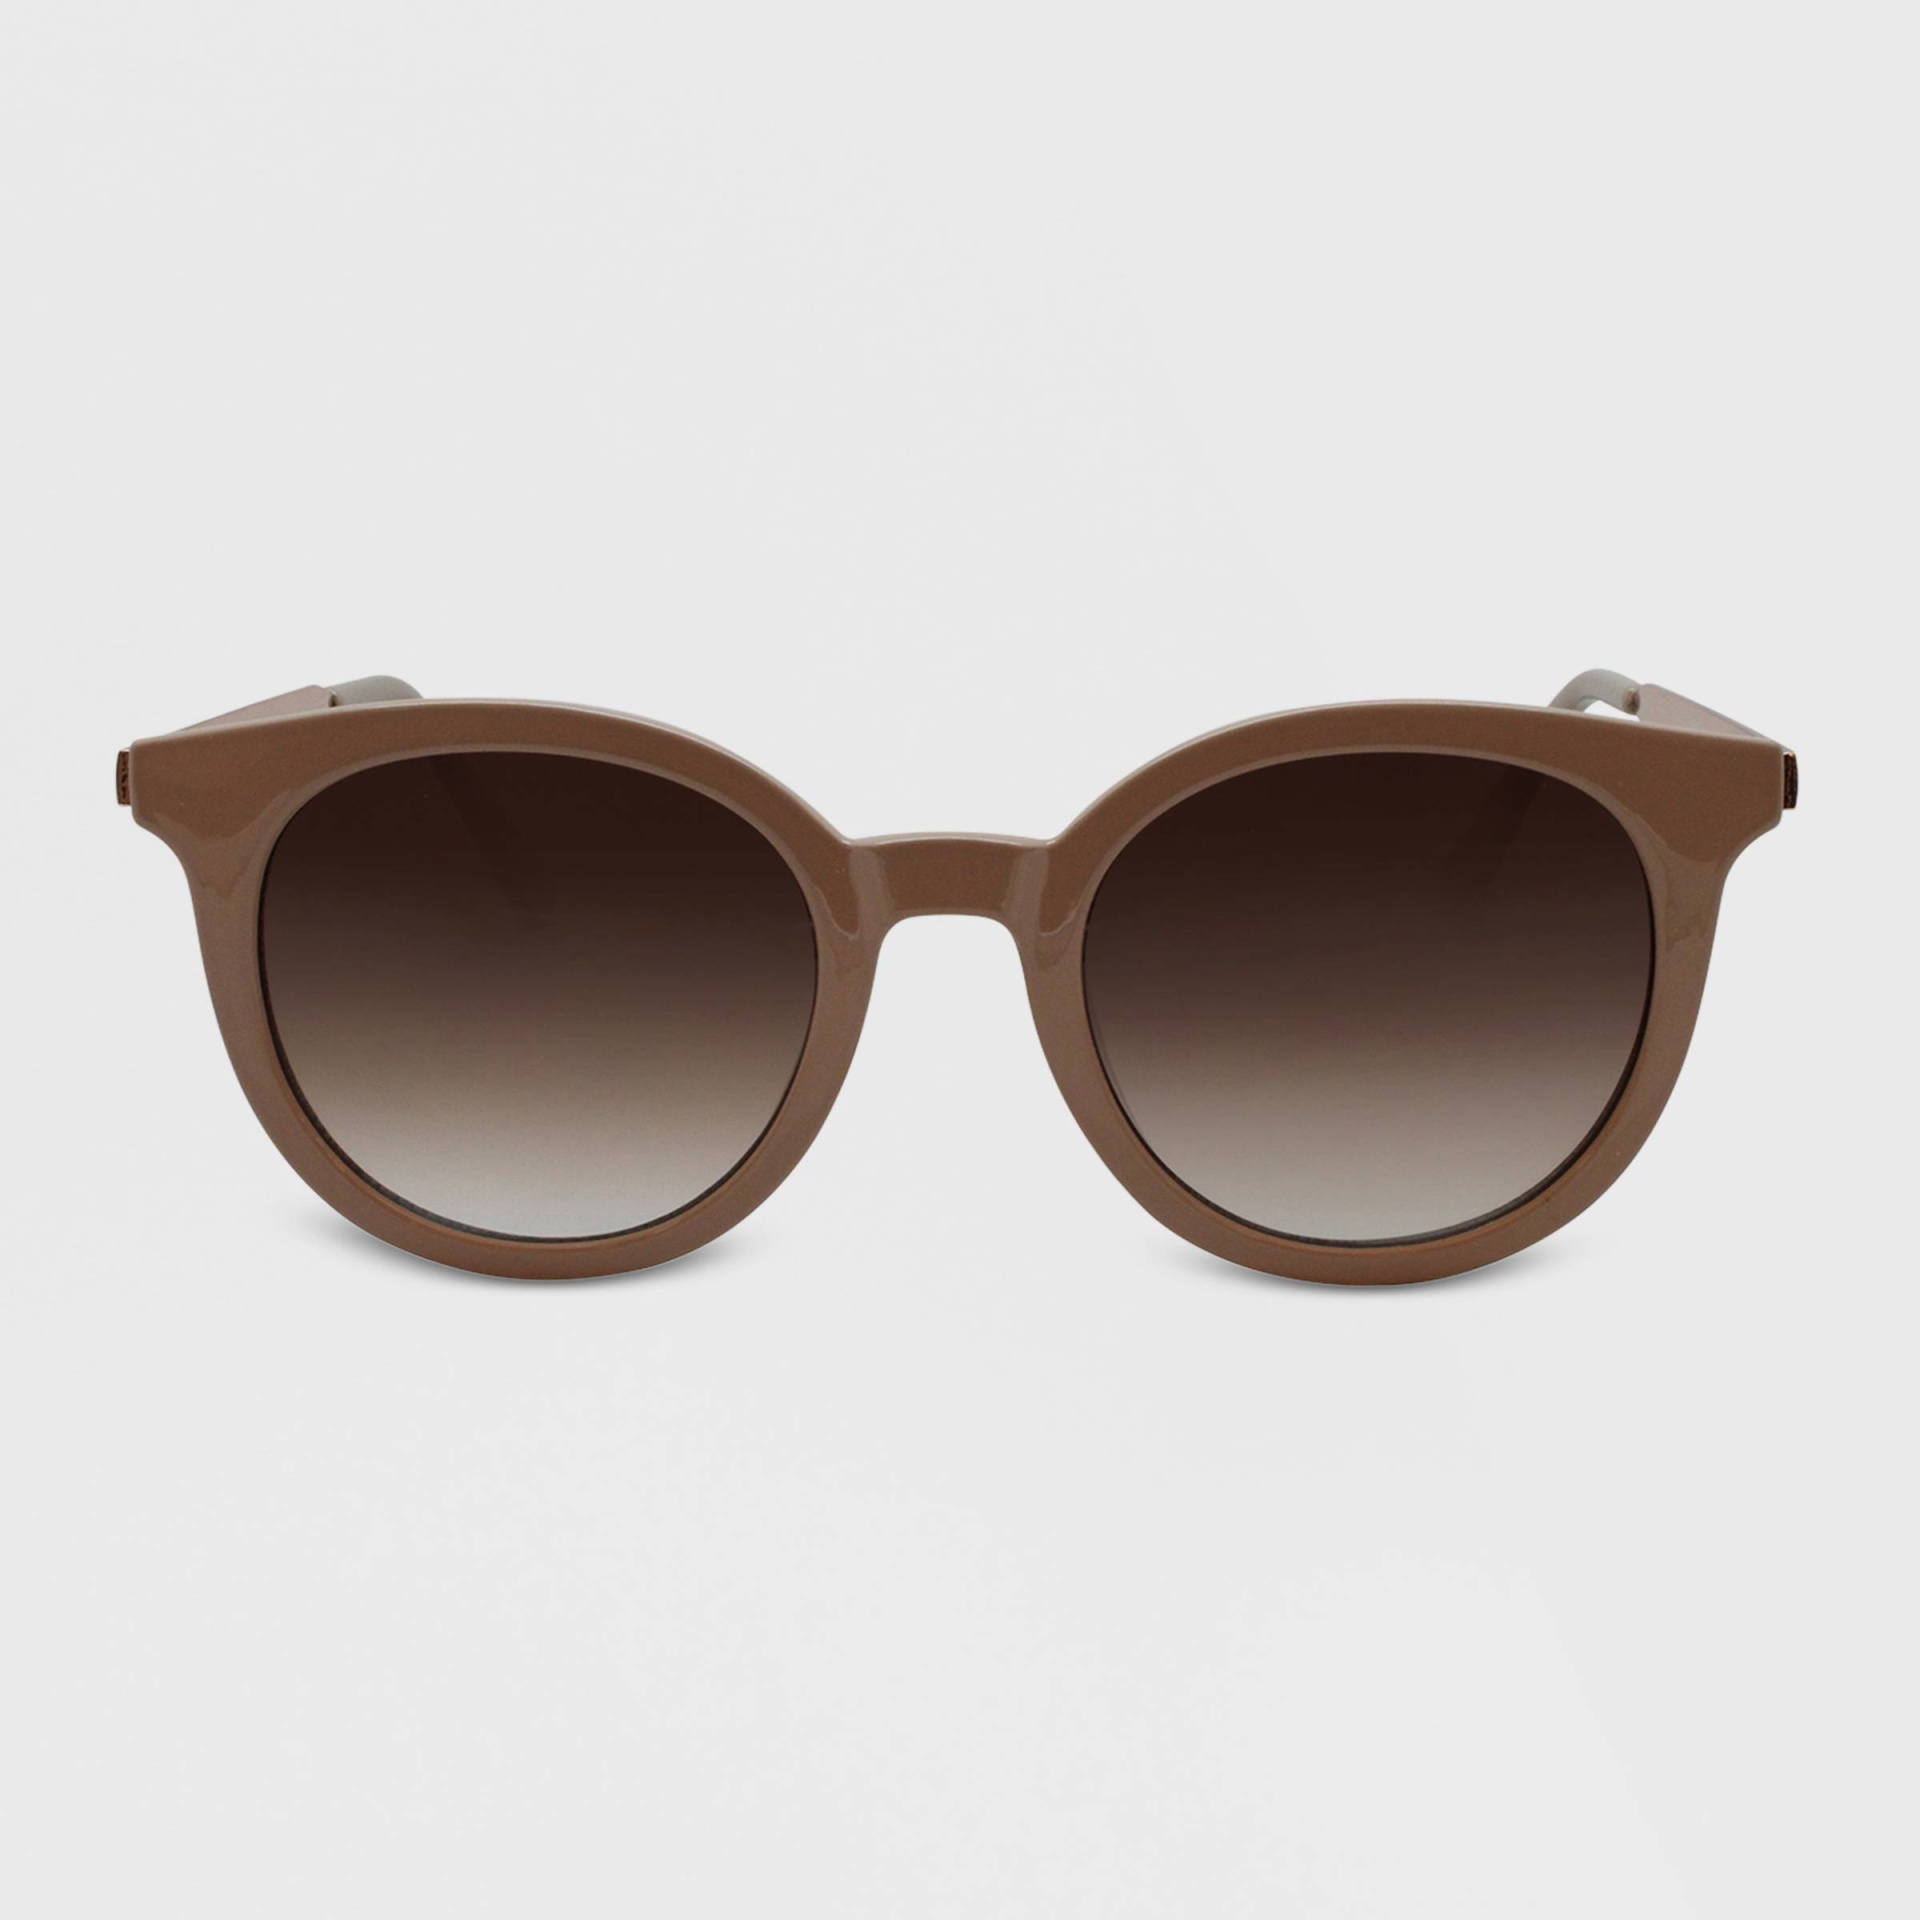 slide 1 of 2, Women's Round Plastic Metal Sunglasses - A New Day Nude, 1 ct